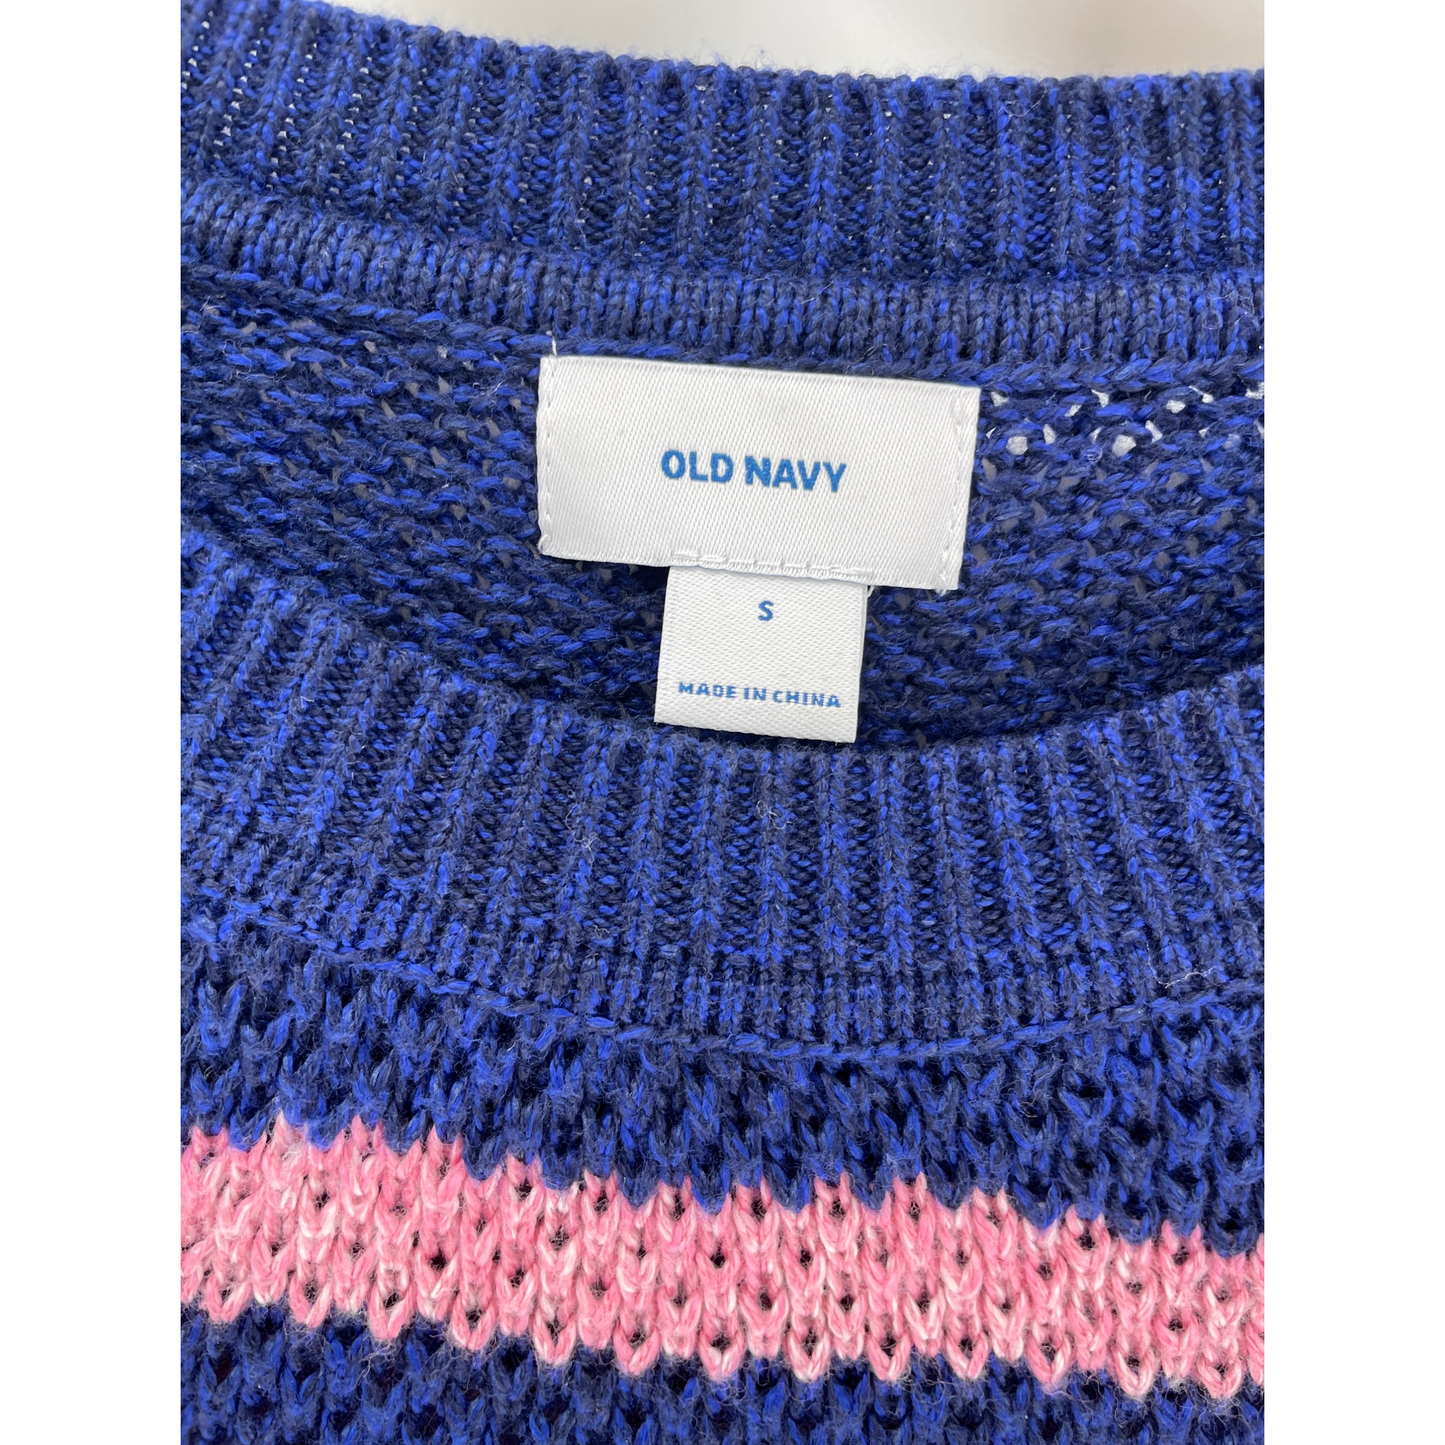 Old Navy Small Blue and Pink Striped Crew Neck Sweater